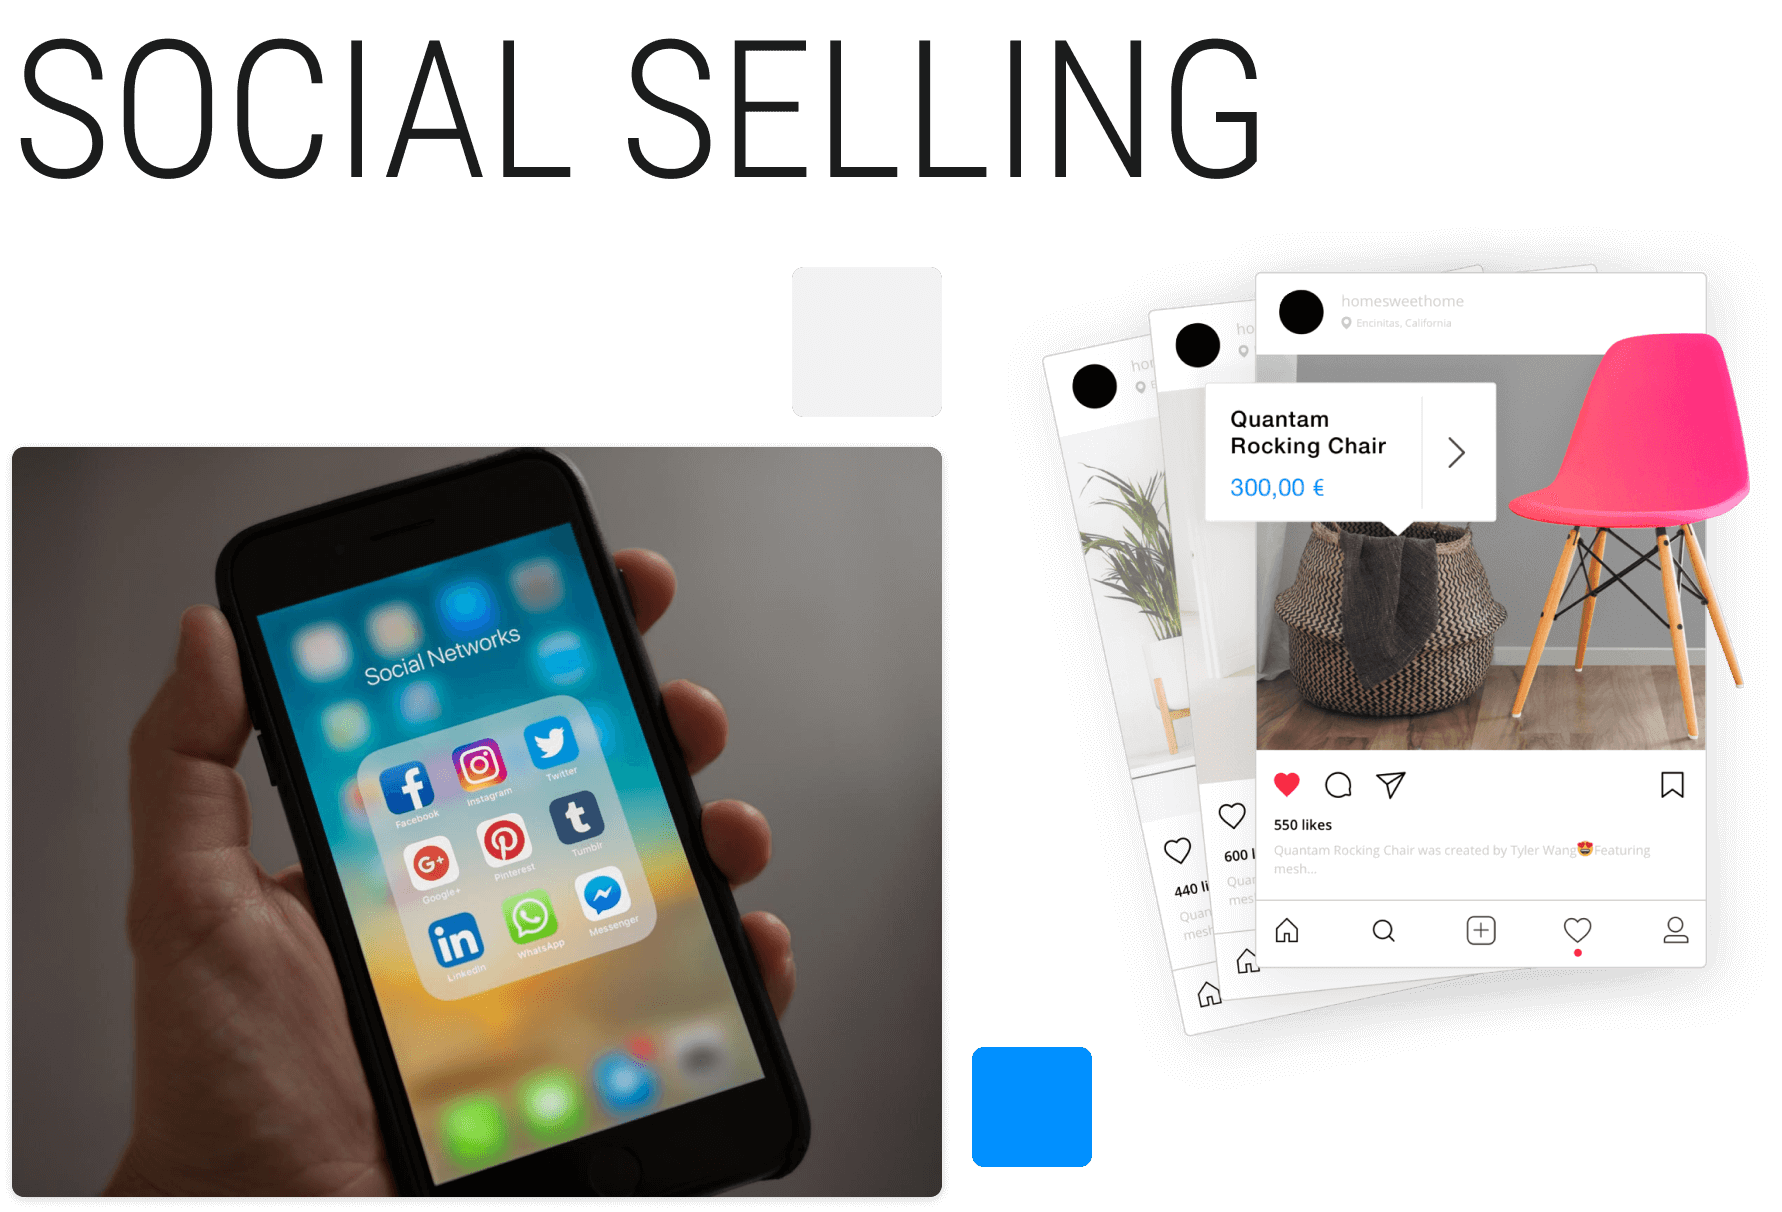 Social Selling solutions